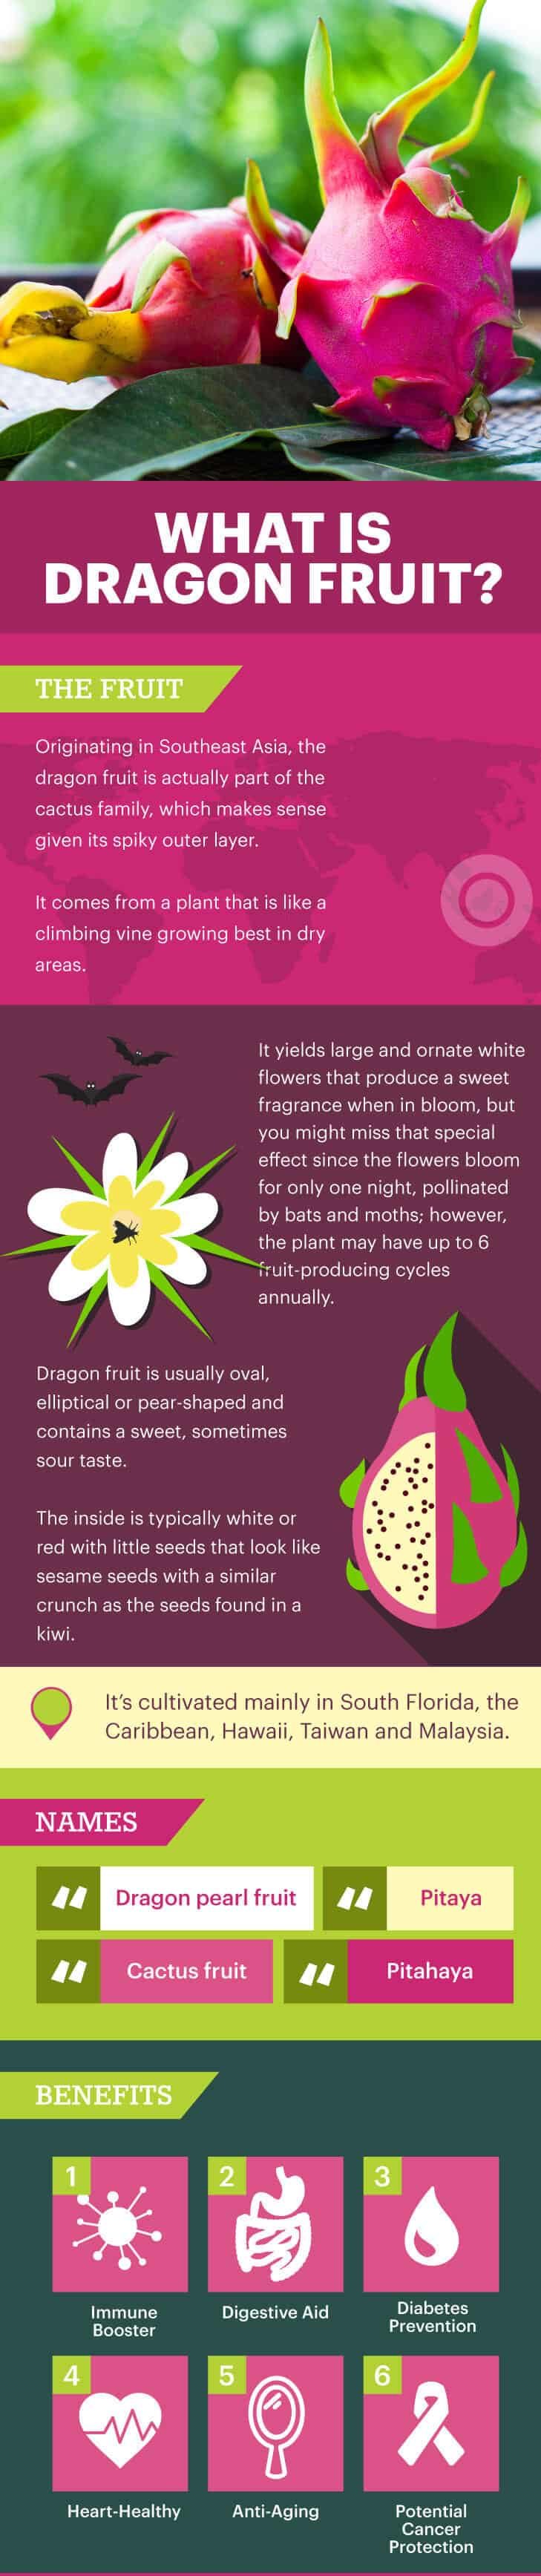 What is dragon fruit? - Dr. Axe